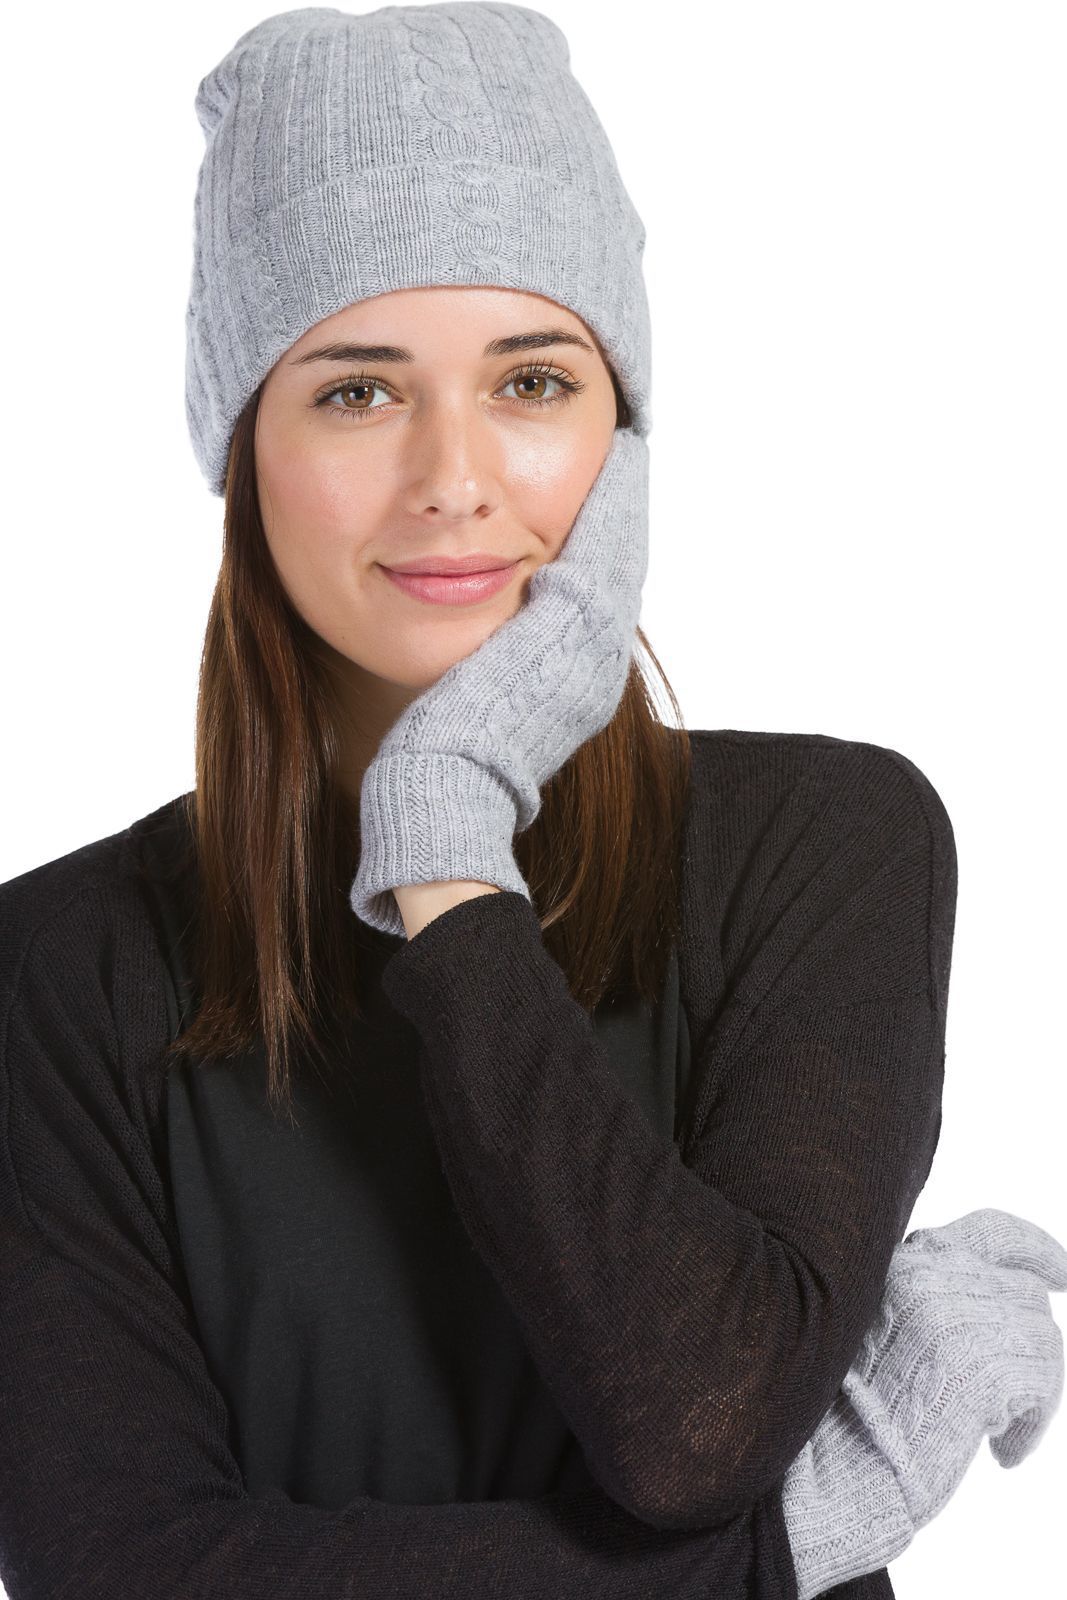 Women's 2pc 100% Pure Cashmere Cable Knit Hat & Glove Set with Gift Box Womens>Accessories>Cashmere Set Fishers Finery Gray One Size Fits Most 